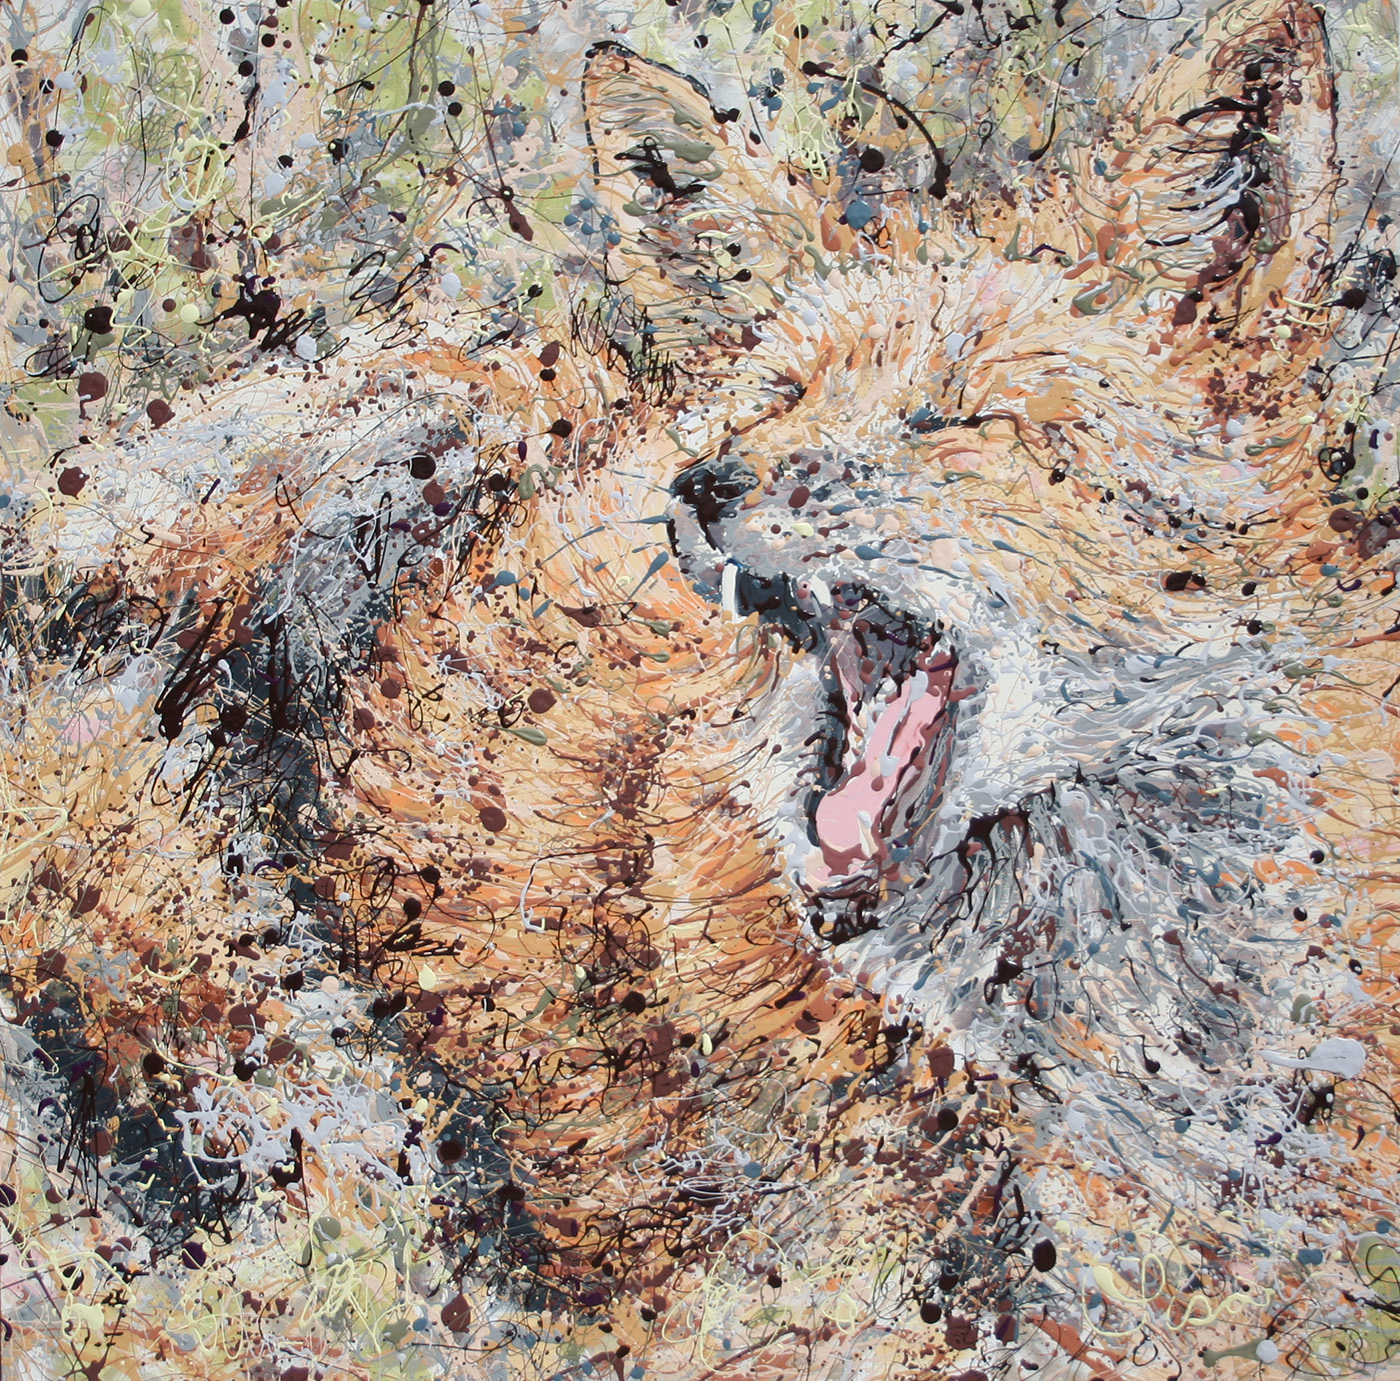 Neighborhood Fox Latex Enamel Painting on Gallery Wrapped Canvas by Fort Collins, Colorado Artist  Lisa Cameron Russell